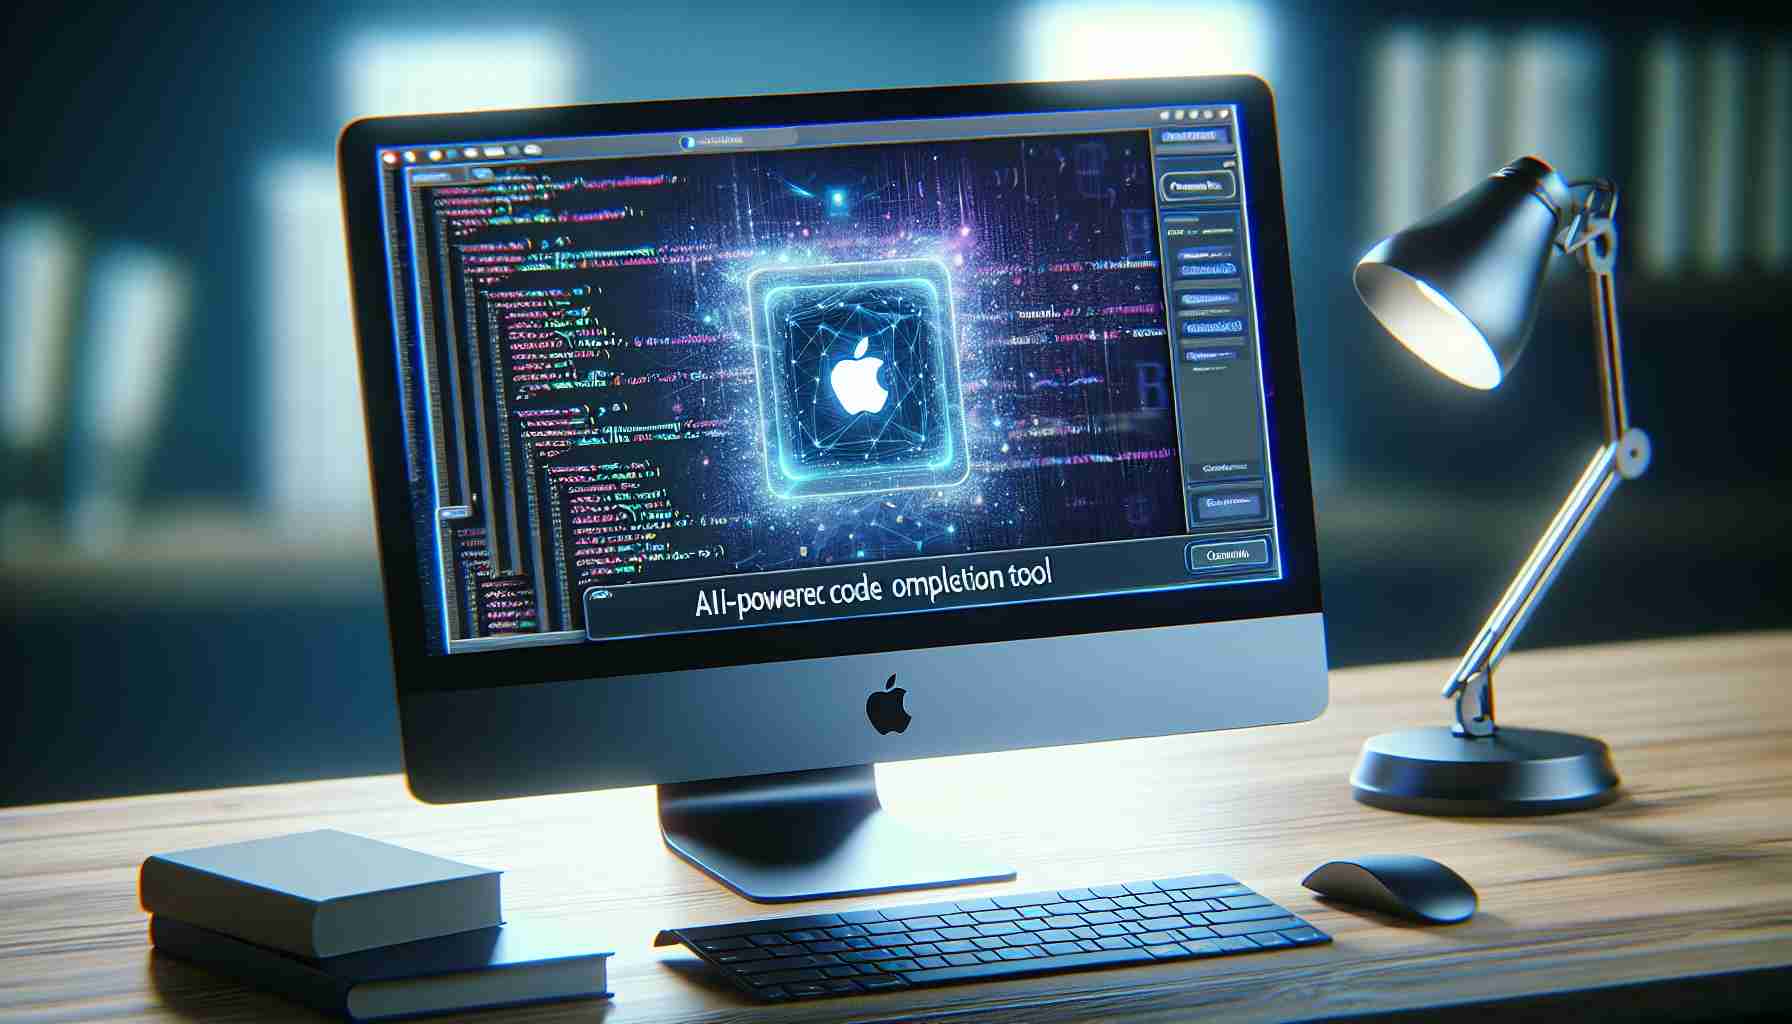 Apple to Introduce AI-Powered Code Completion Tool